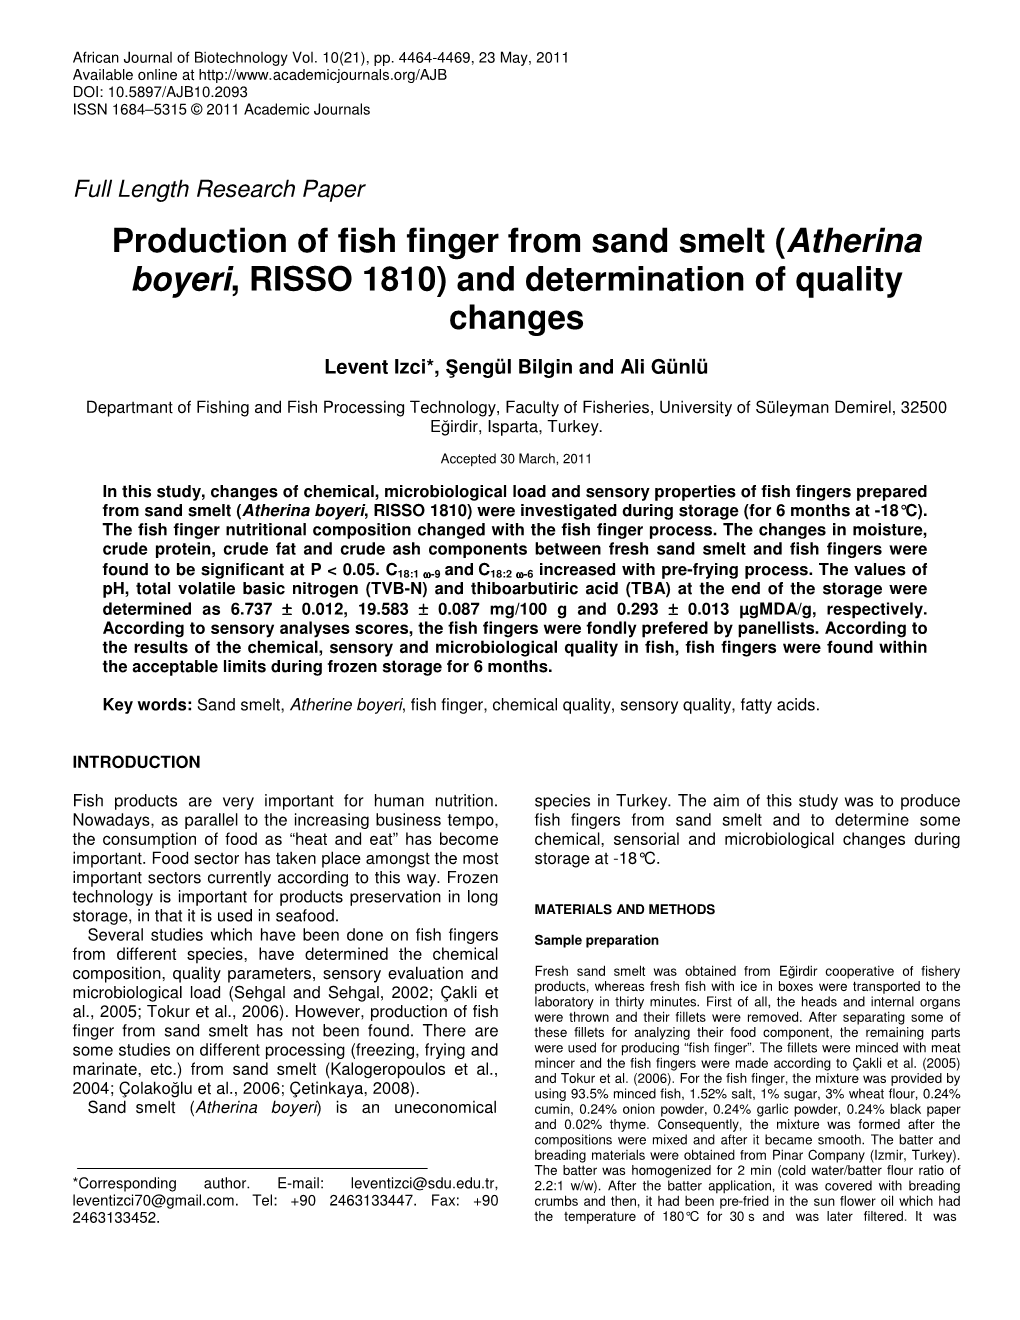 Production of Fish Finger from Sand Smelt (Atherina Boyeri, RISSO 1810) and Determination of Quality Changes